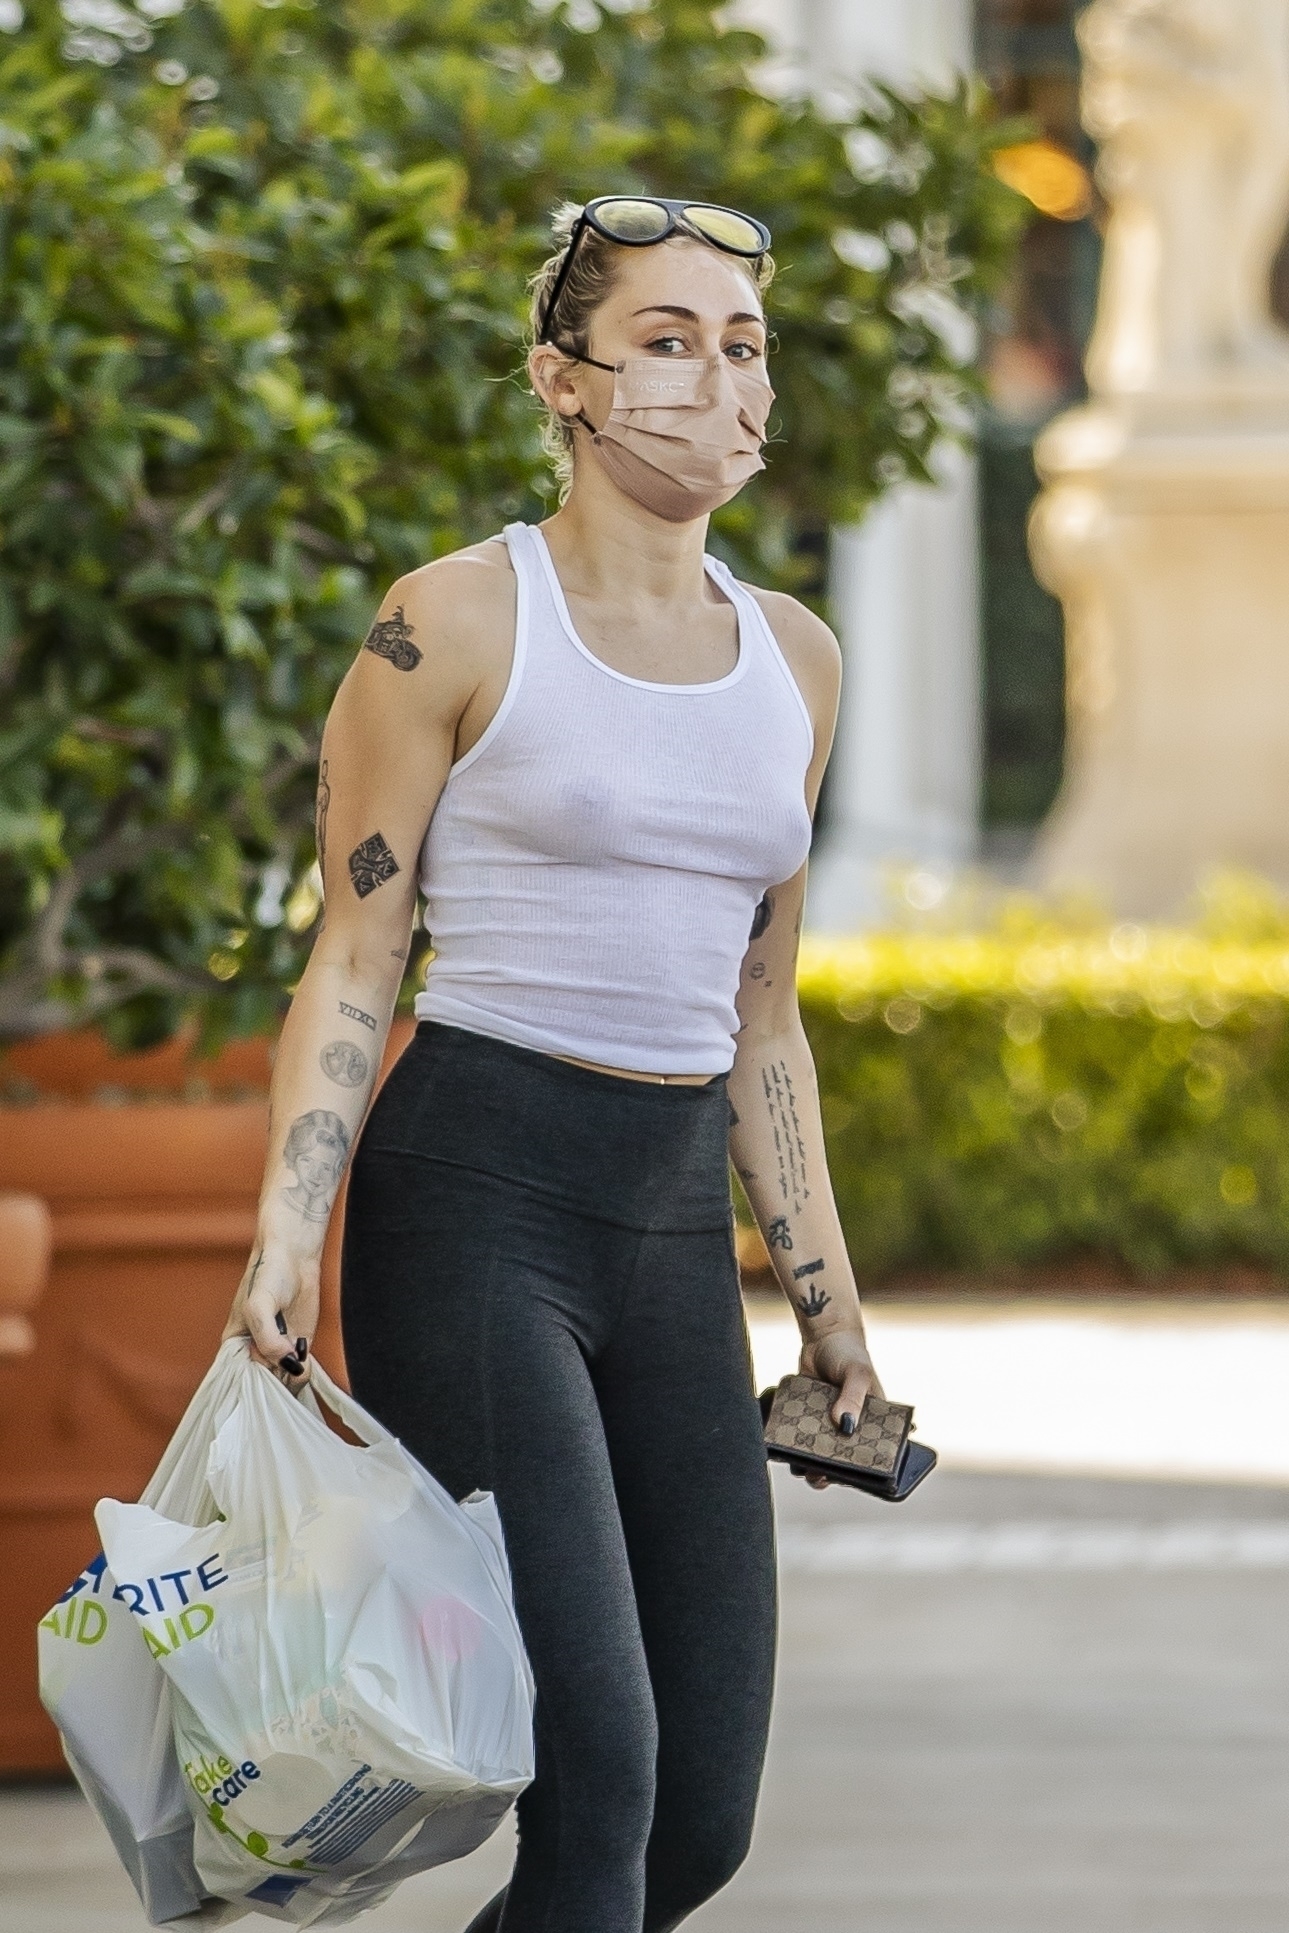 Braless Miley Cyrus Looking Very Sexy in Her Simple Tank Top and Tight Pants